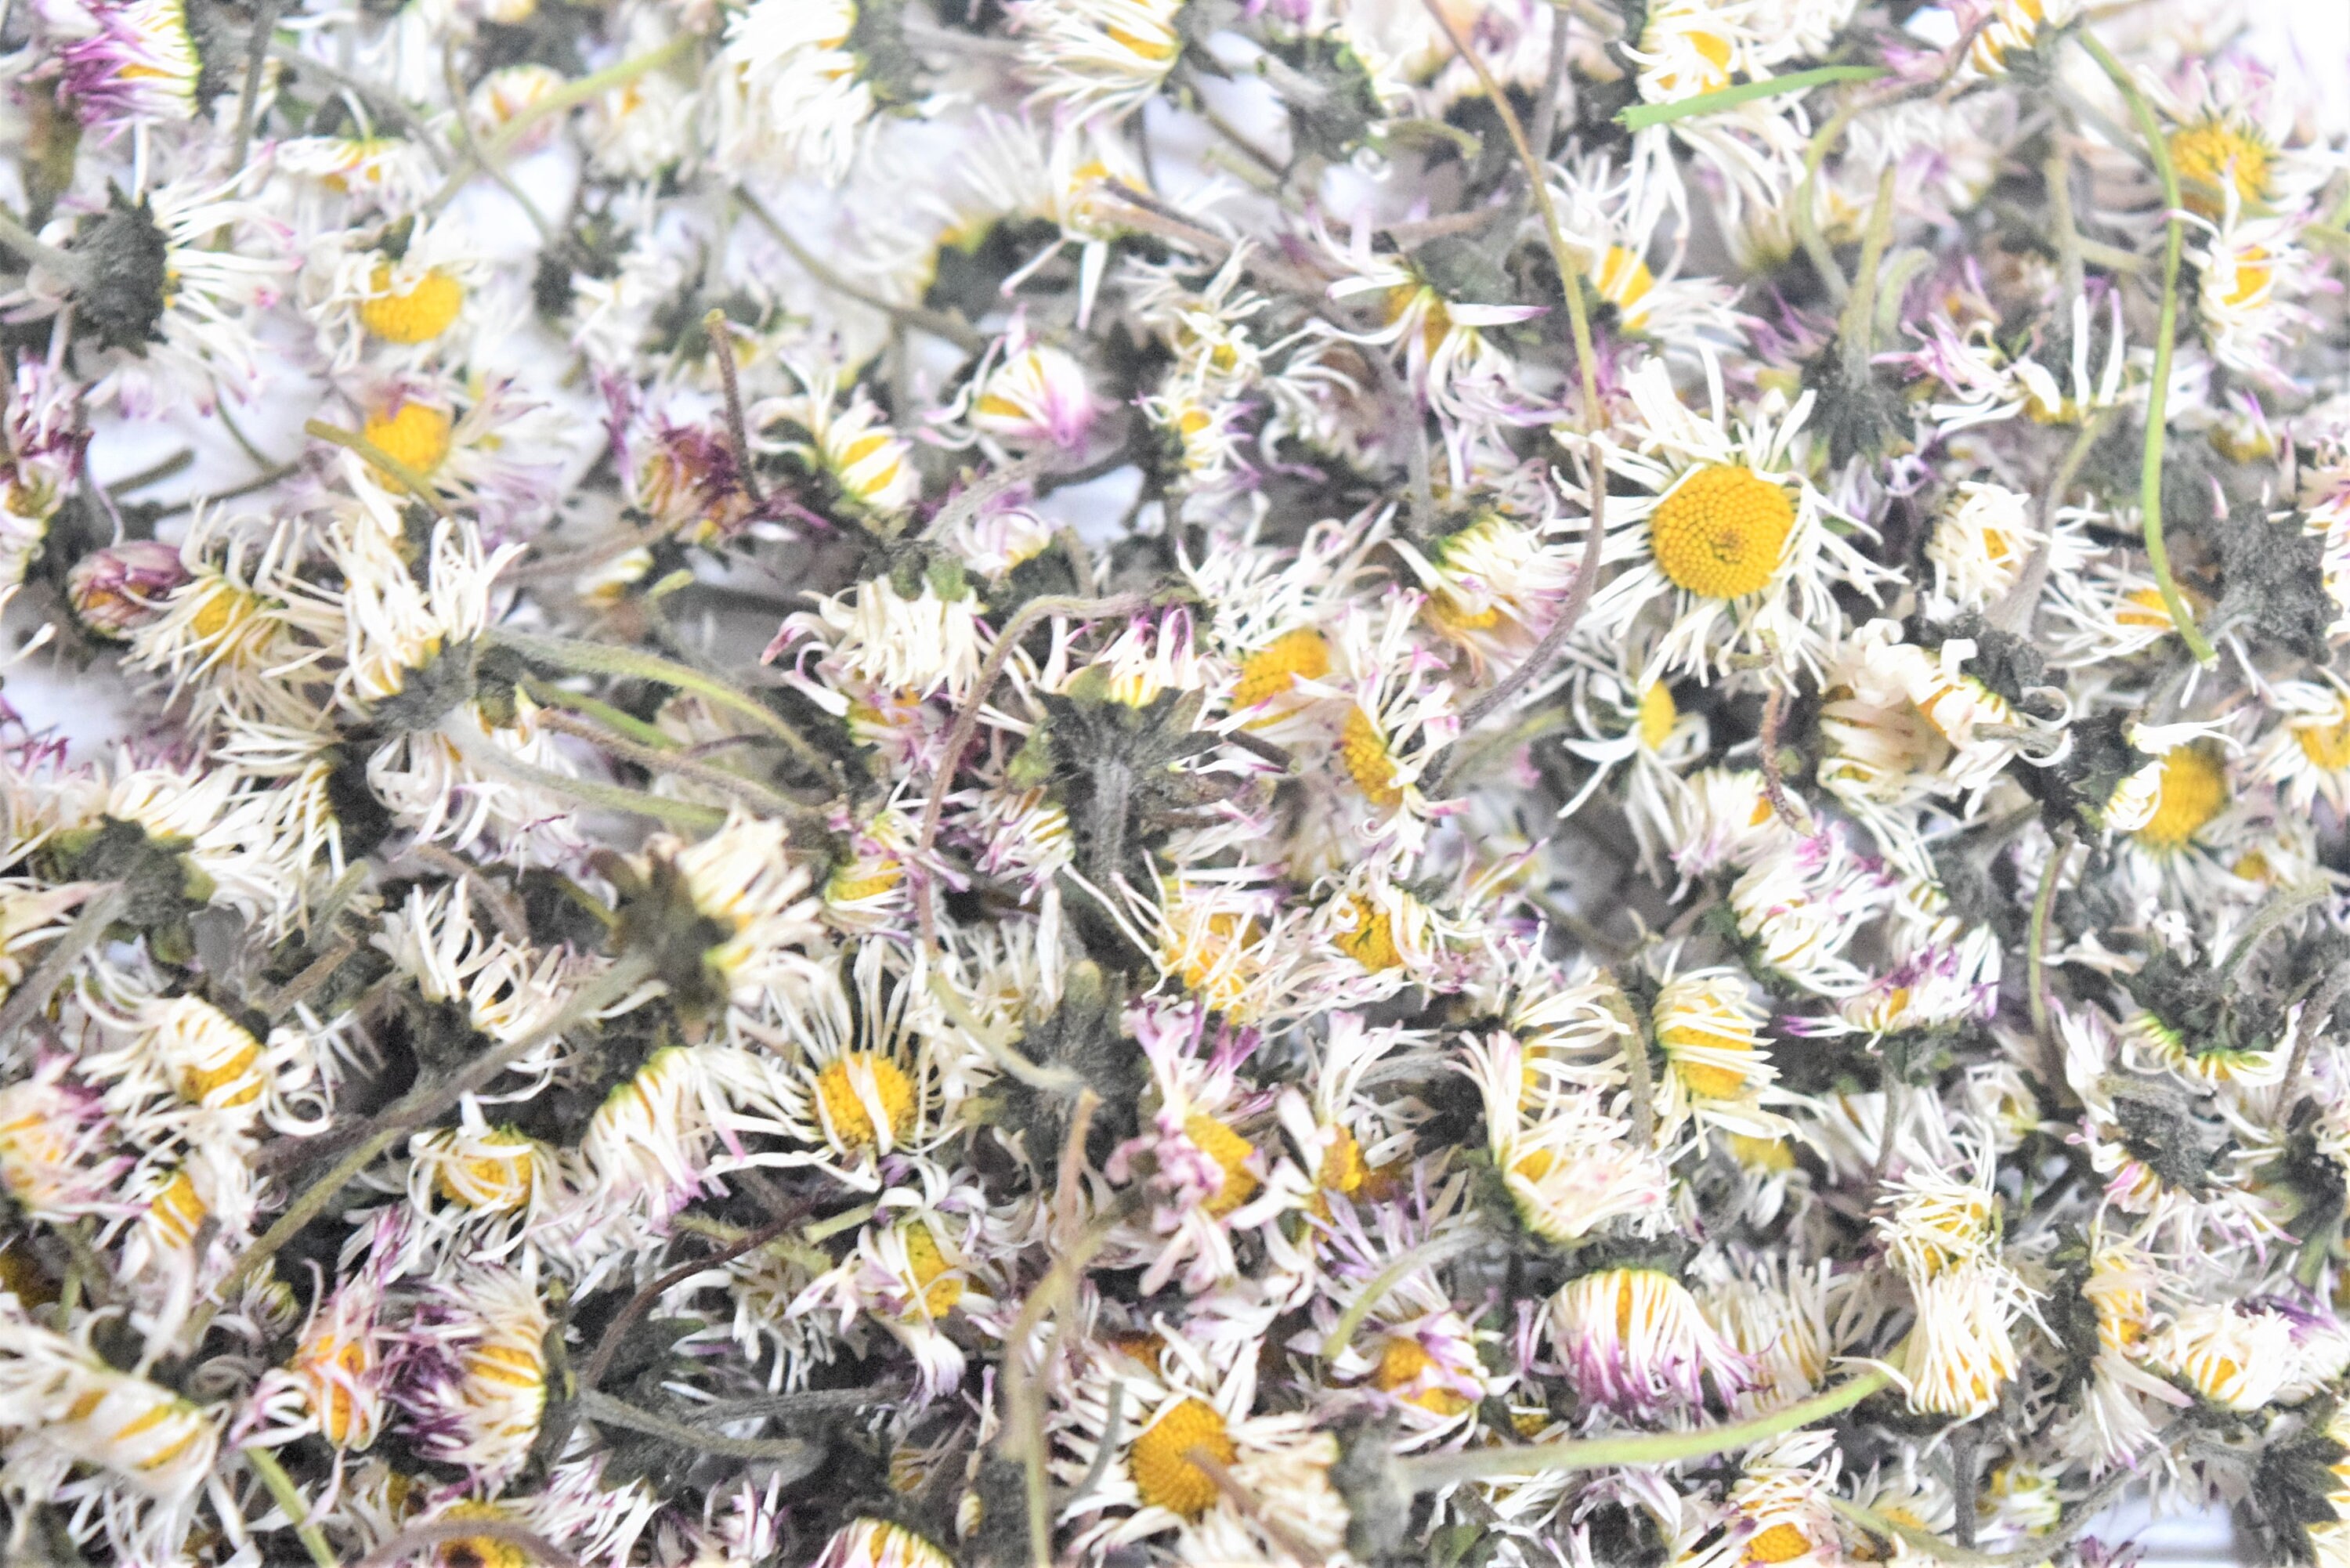 120 Pieces Real Dried Daisy Flowers Natural Dried Daisies DIY Dry